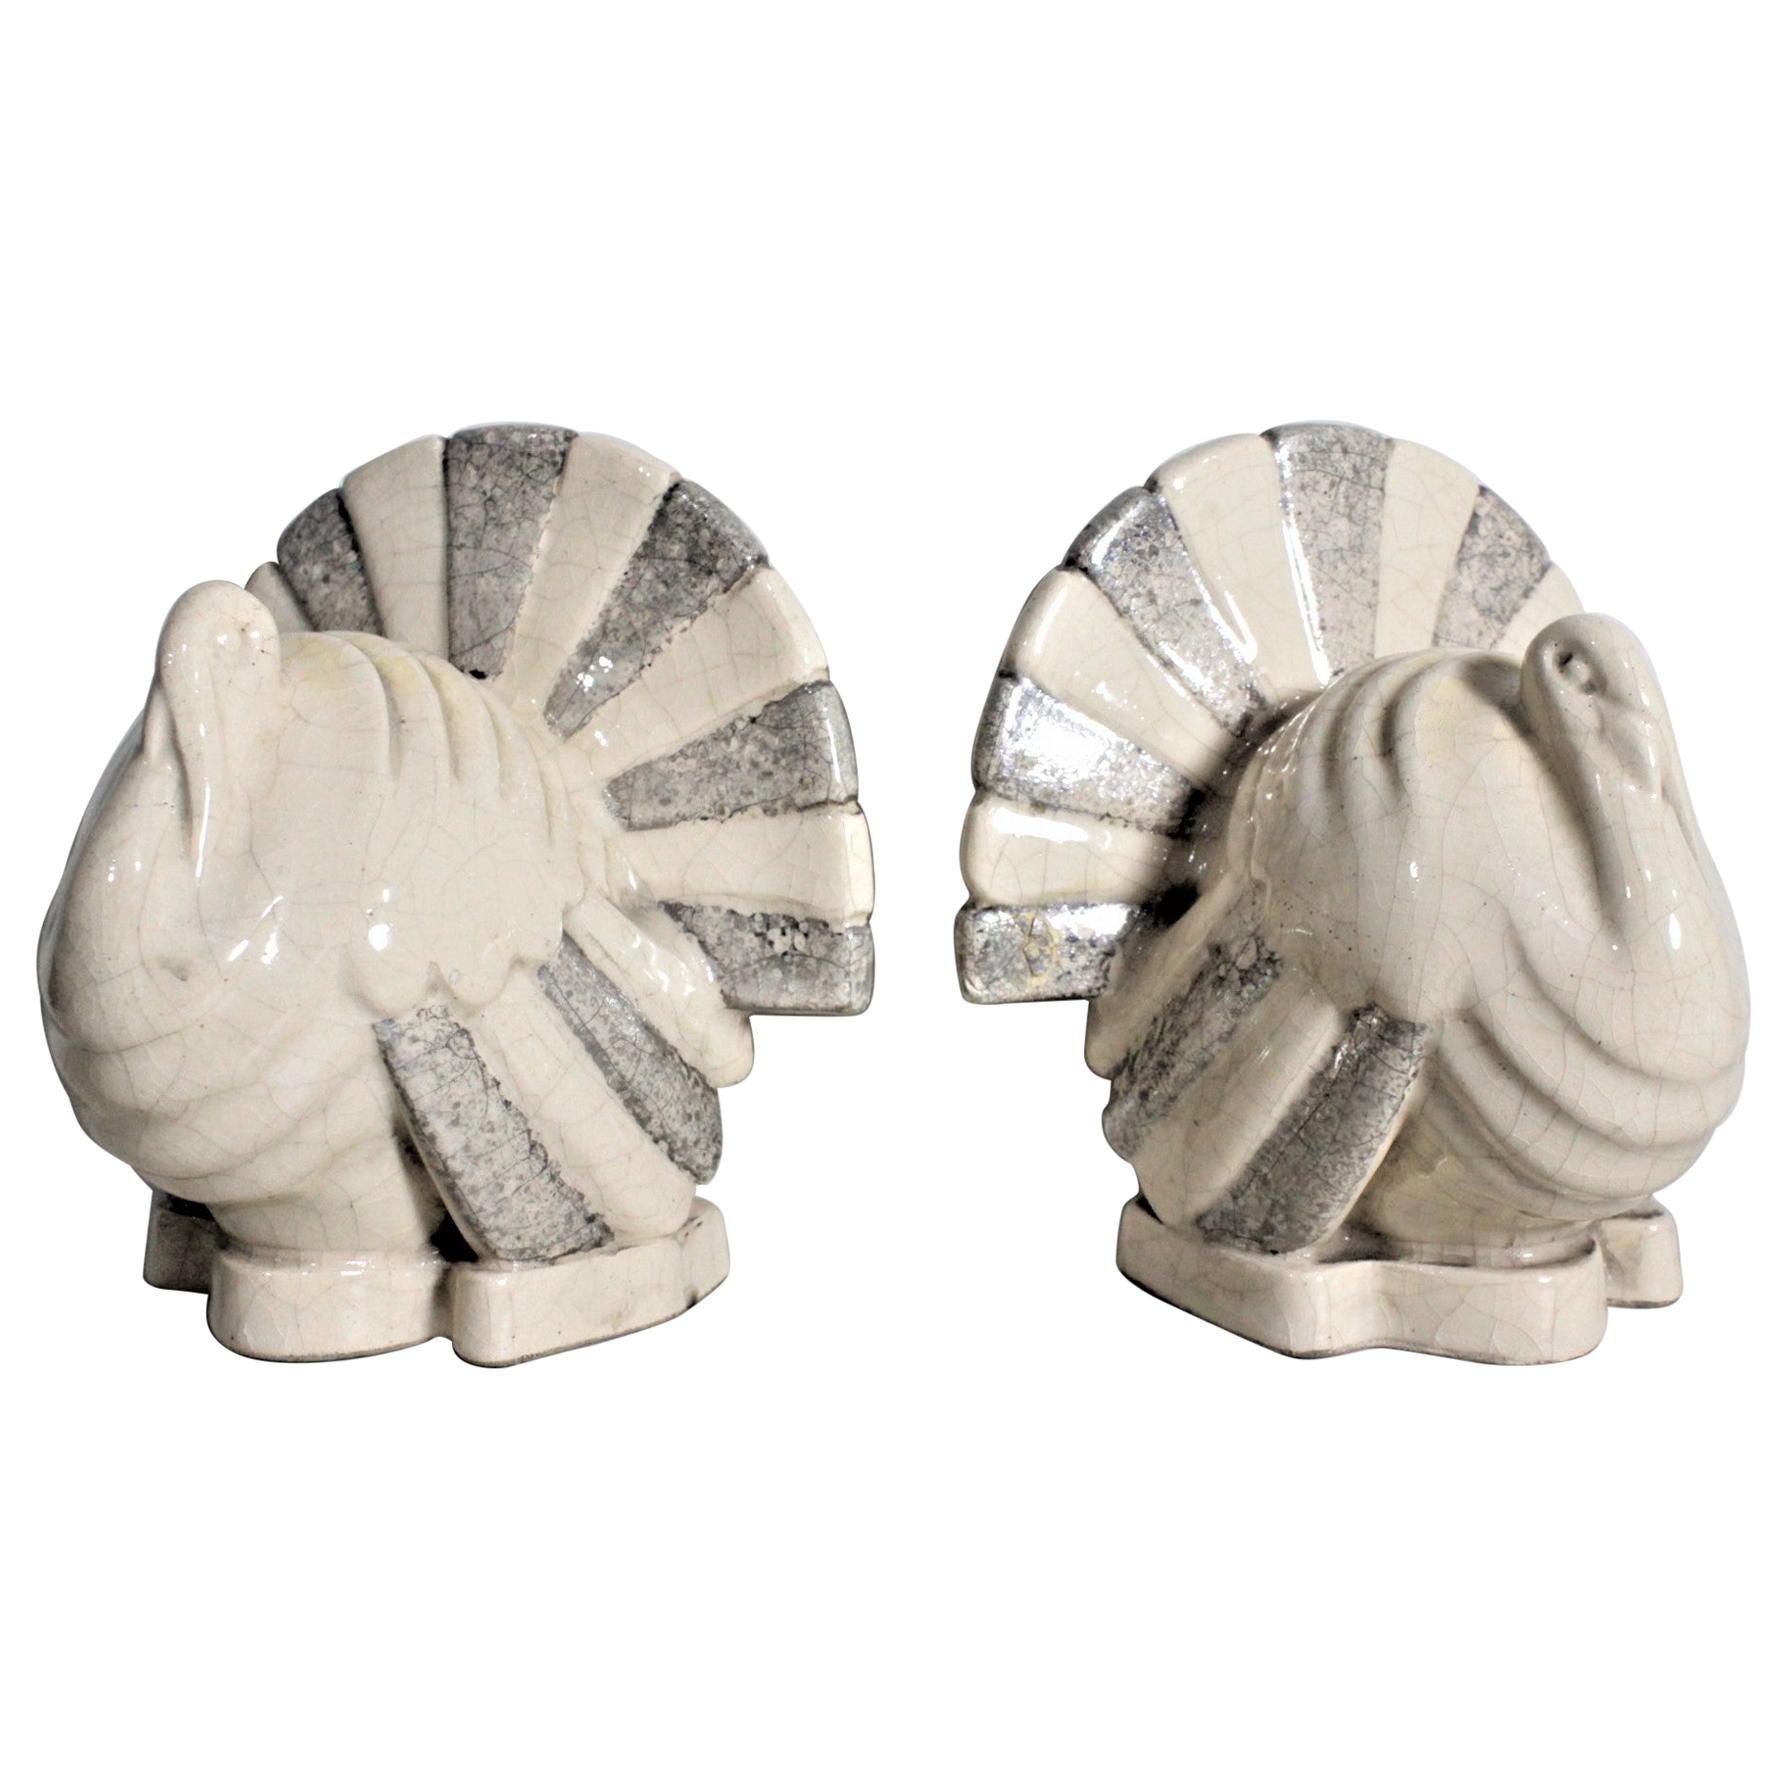 Art Deco Figural Ceramic Turkey Bookends in Taupe and Charcoal Grey Luster Glaze